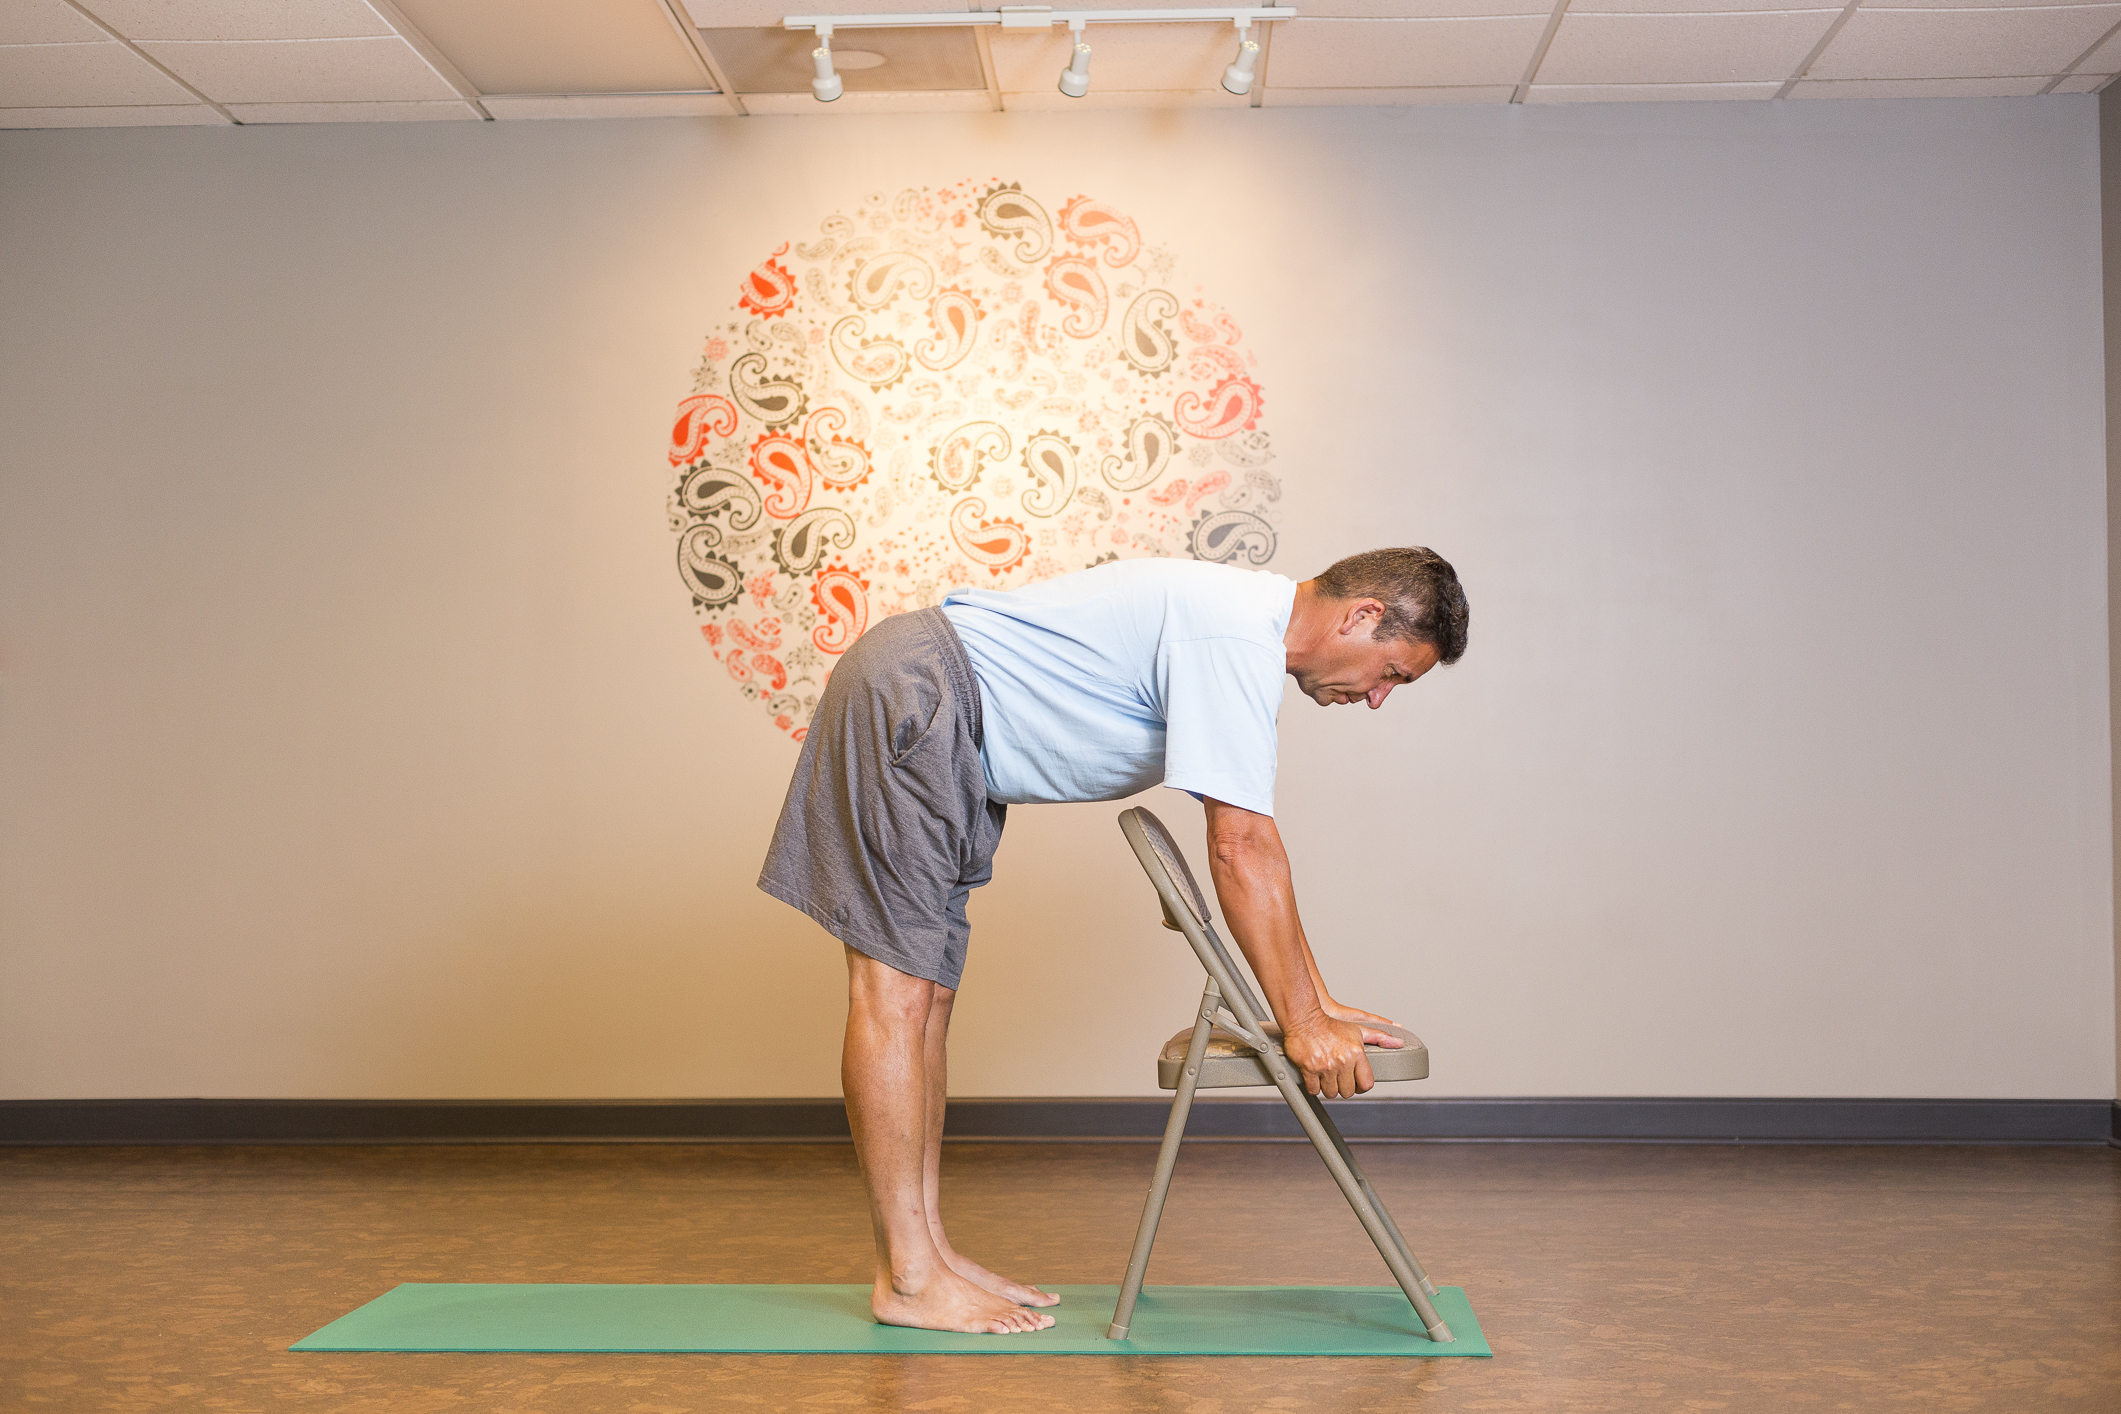 Yoga Poses for Arthritis Patients from Johns Hopkins • Johns